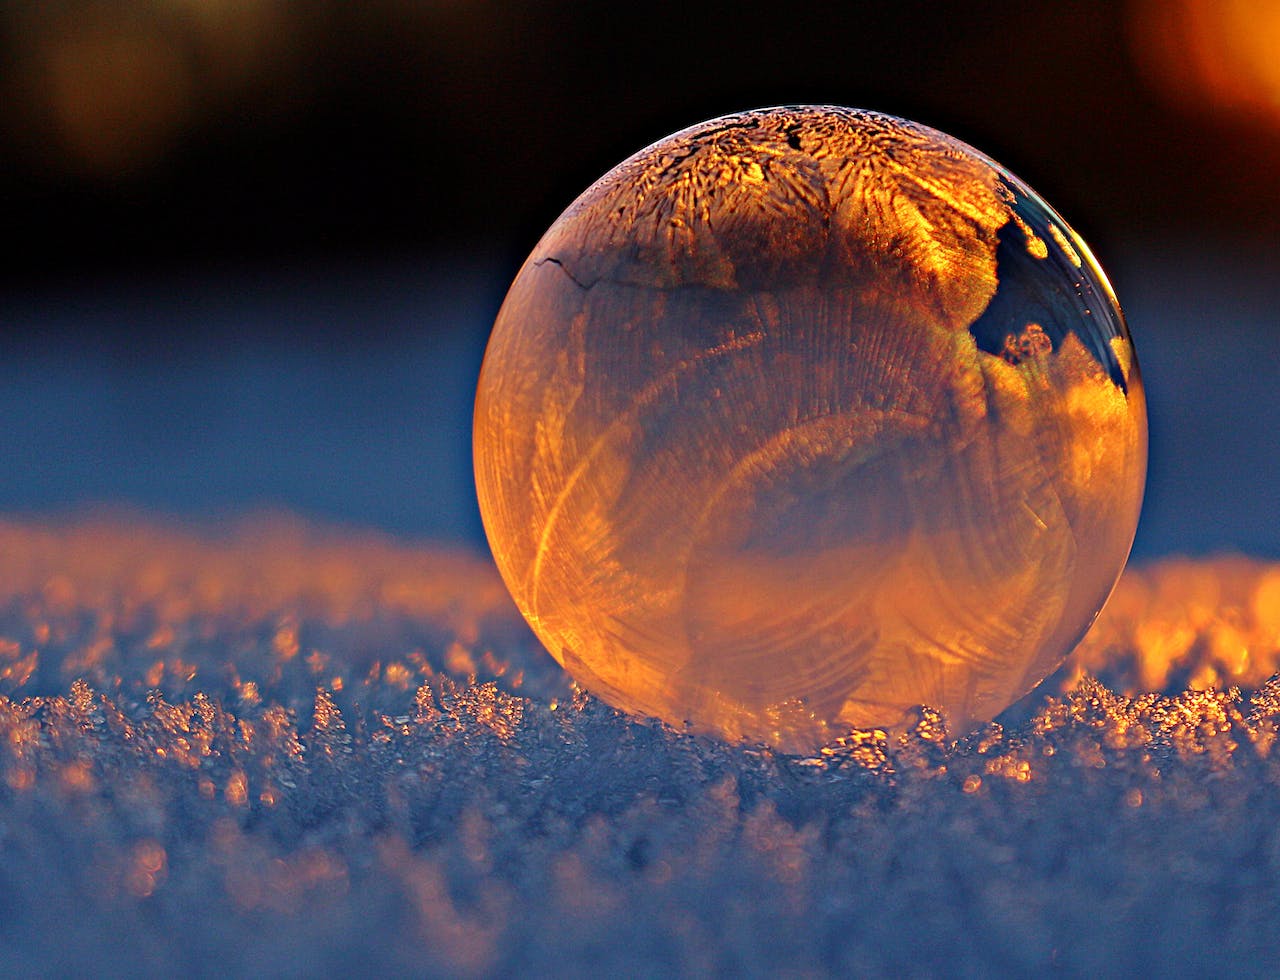 Clear Glass Sphere reflecting glowing ice